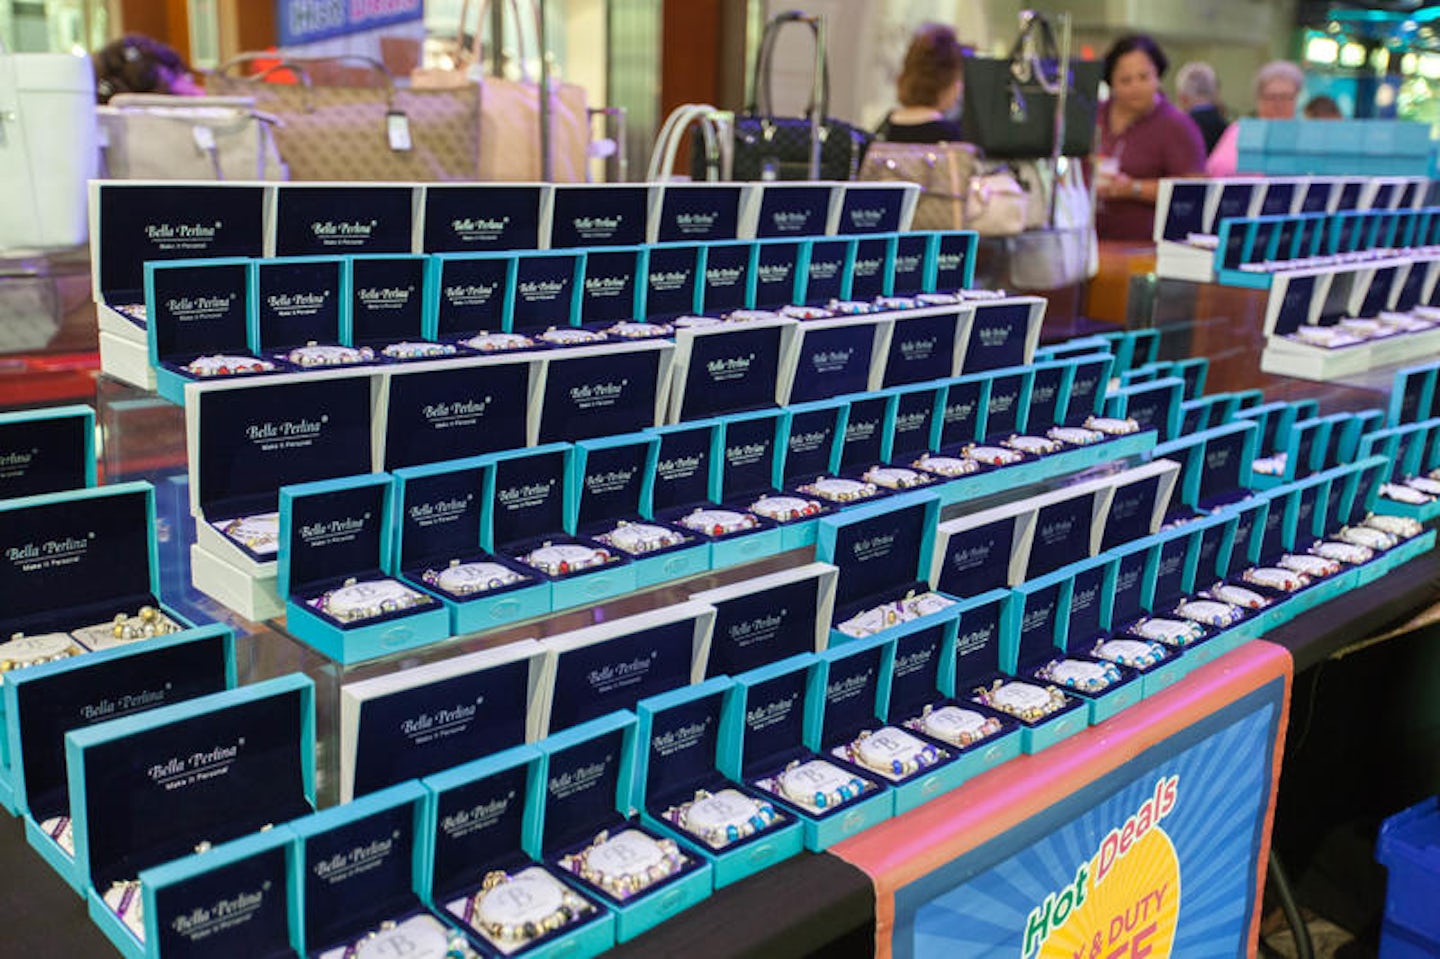 Promenade Shop Sales on Independence of the Seas